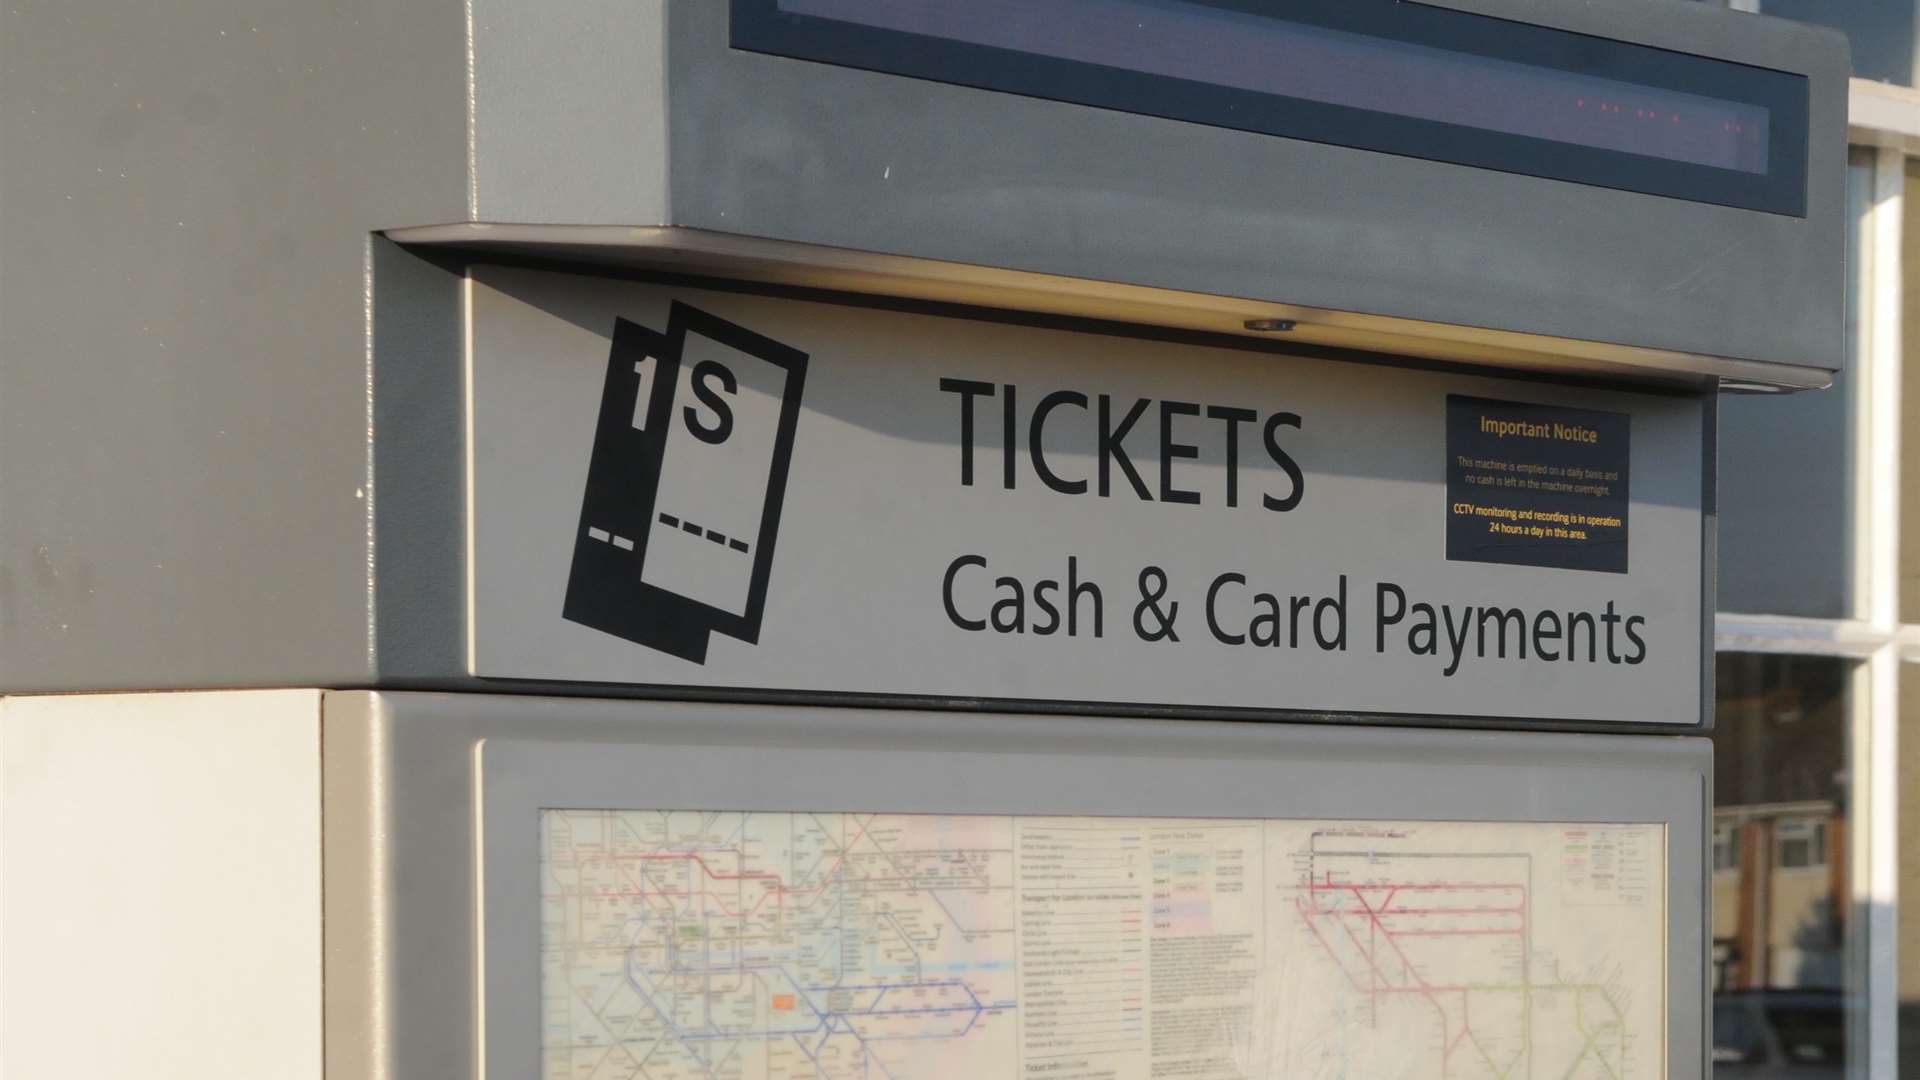 Passengers will be able to buy paper-less tickets